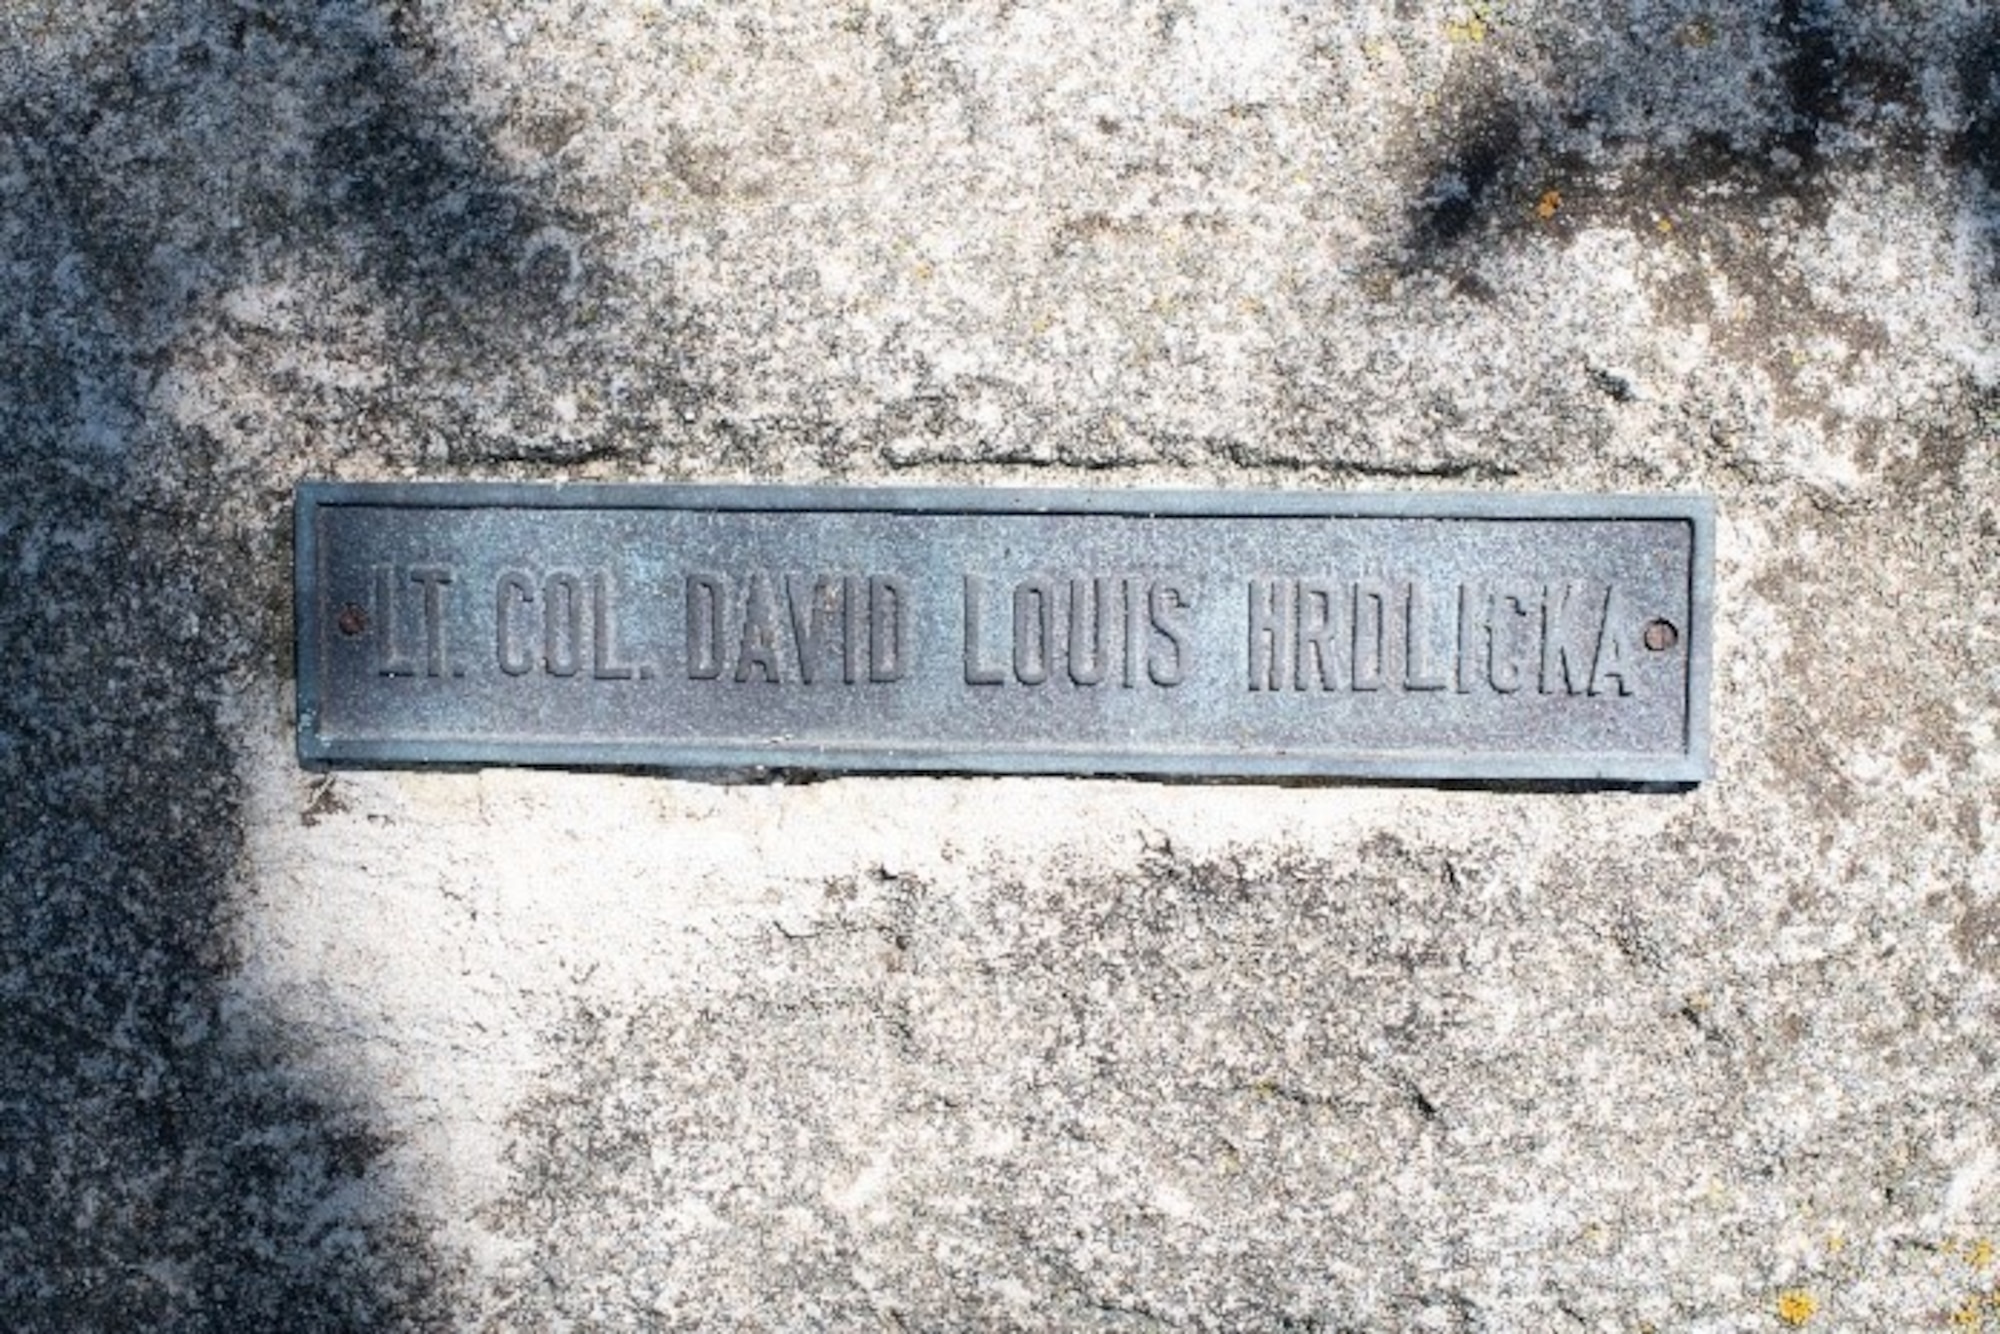 A memorial stone for fighter pilot Lt. Col. David Louis Hrdlicka sits on a memorial walk to honor and remember his life and service at McConnell Air Force Base, Kansas.